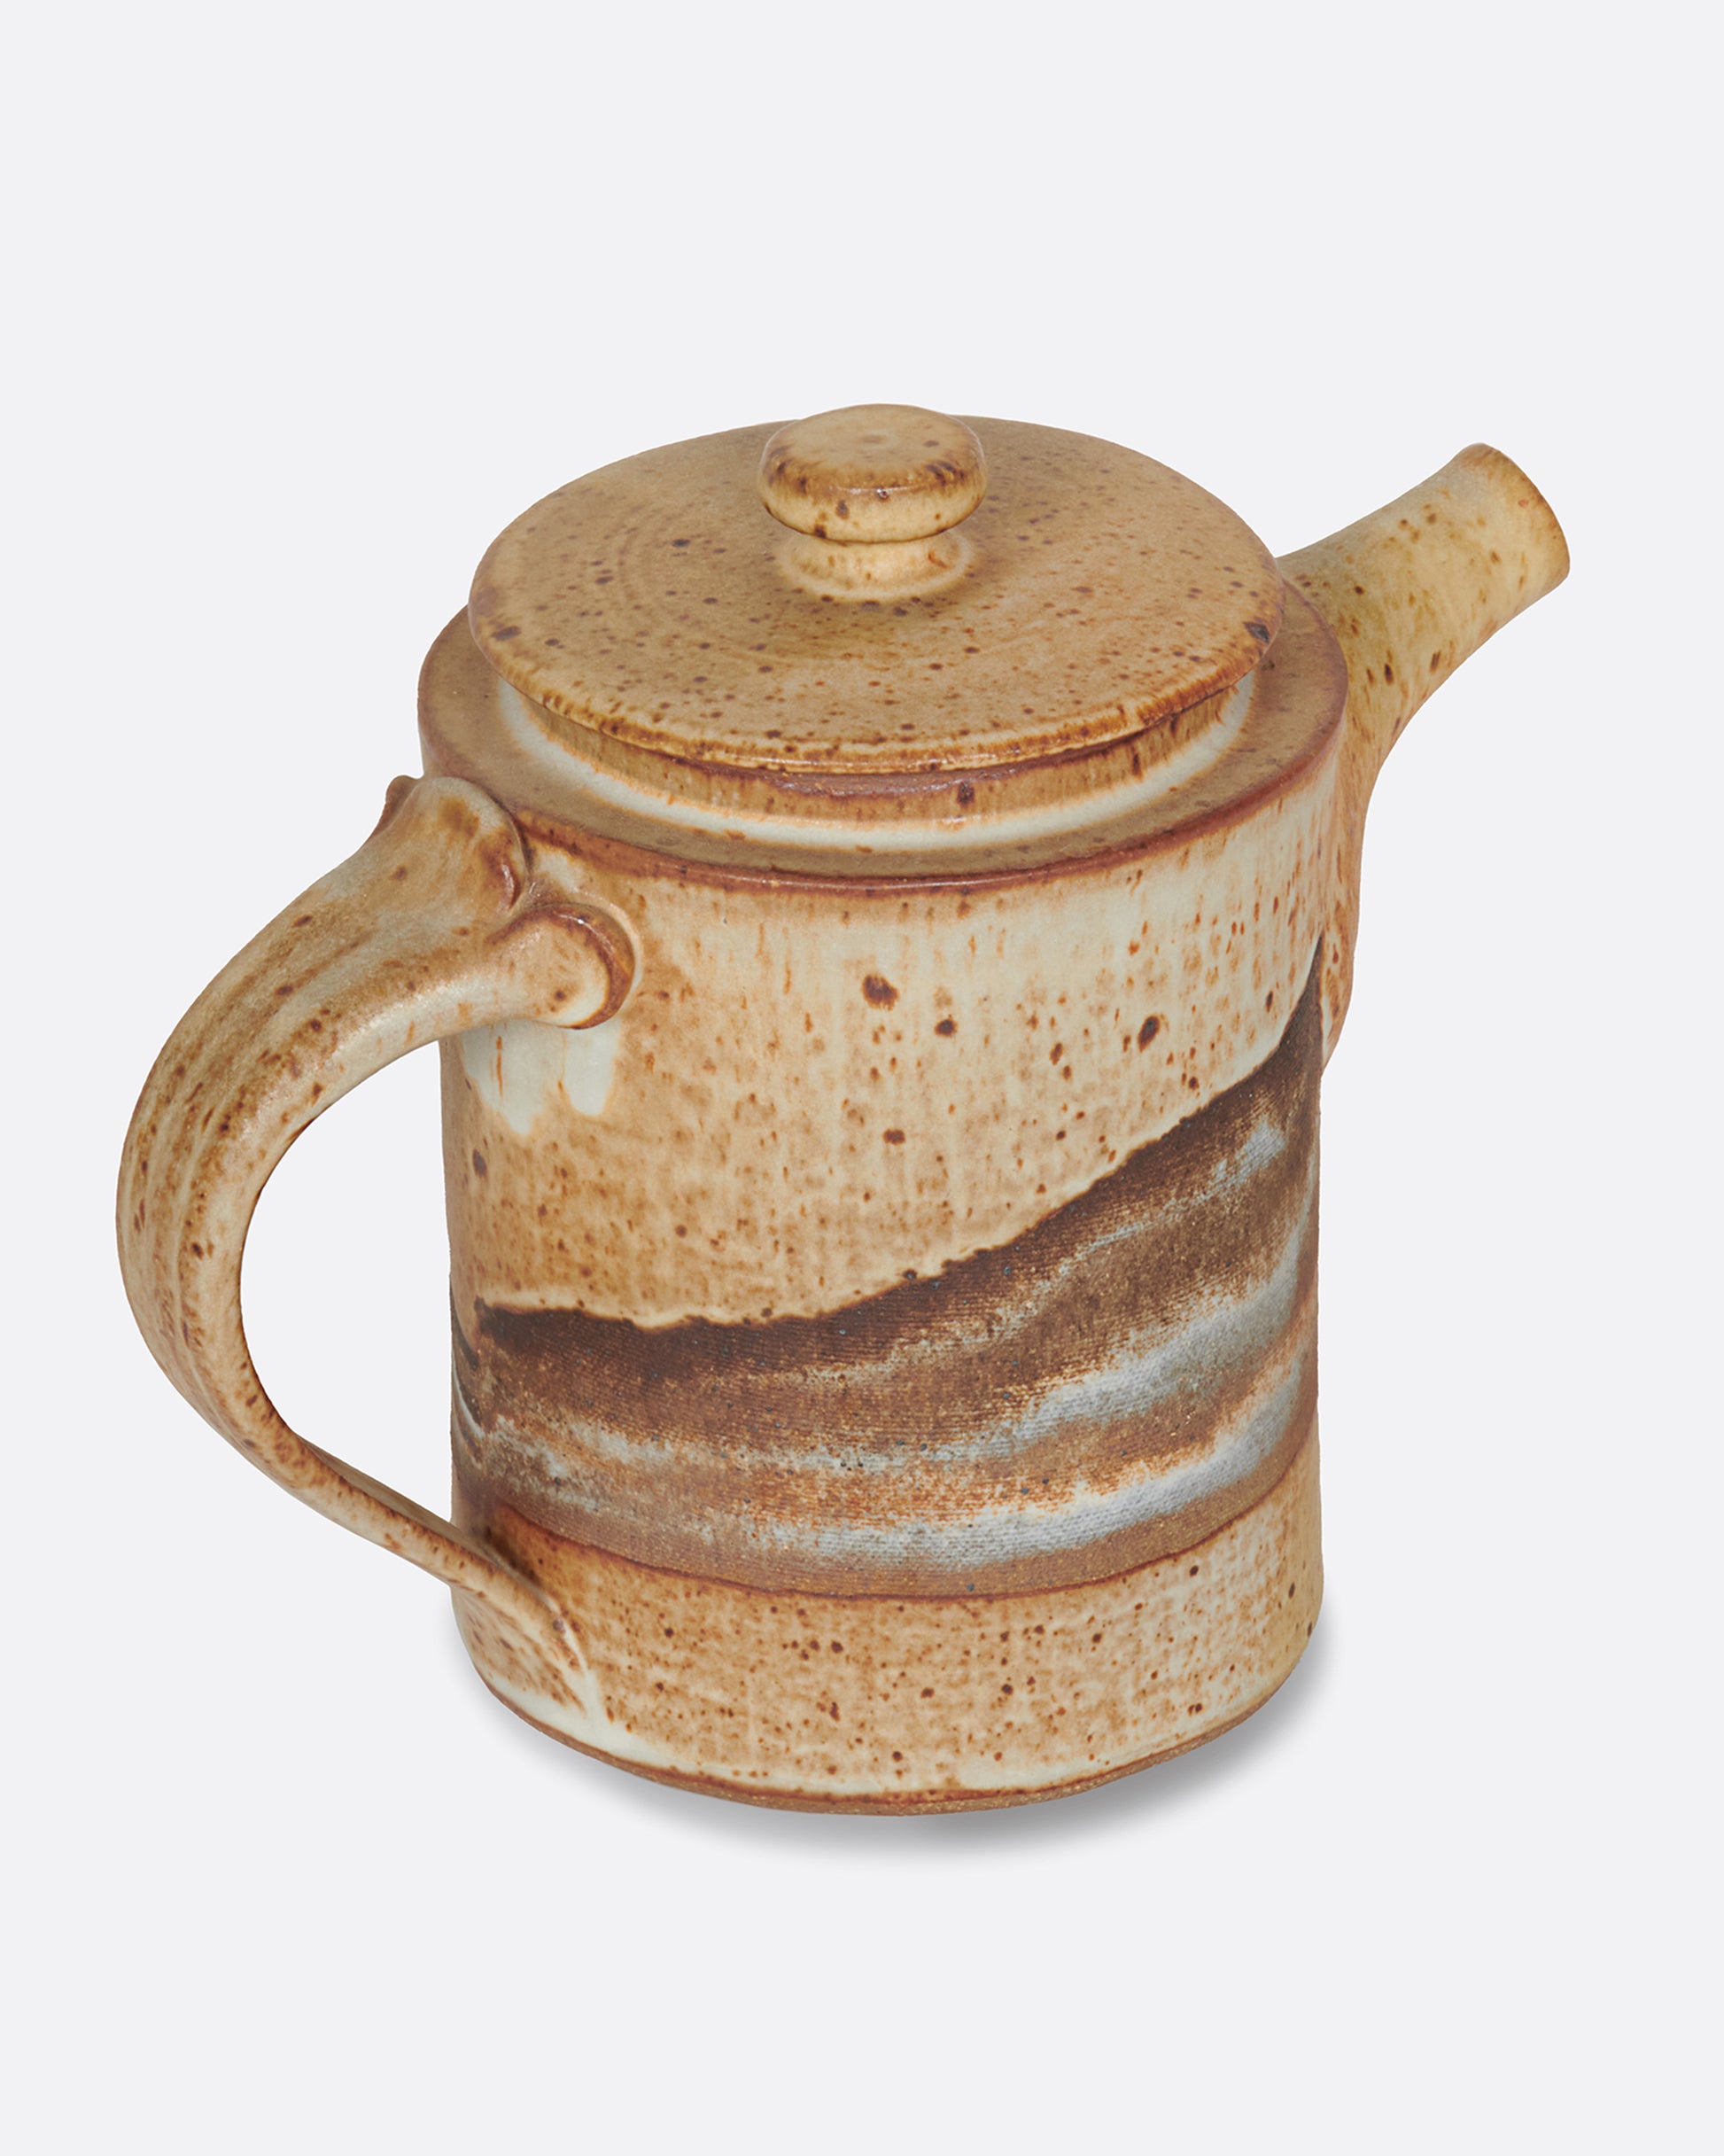 A handcrafted, brown, ceramic teapot with rippled glaze.